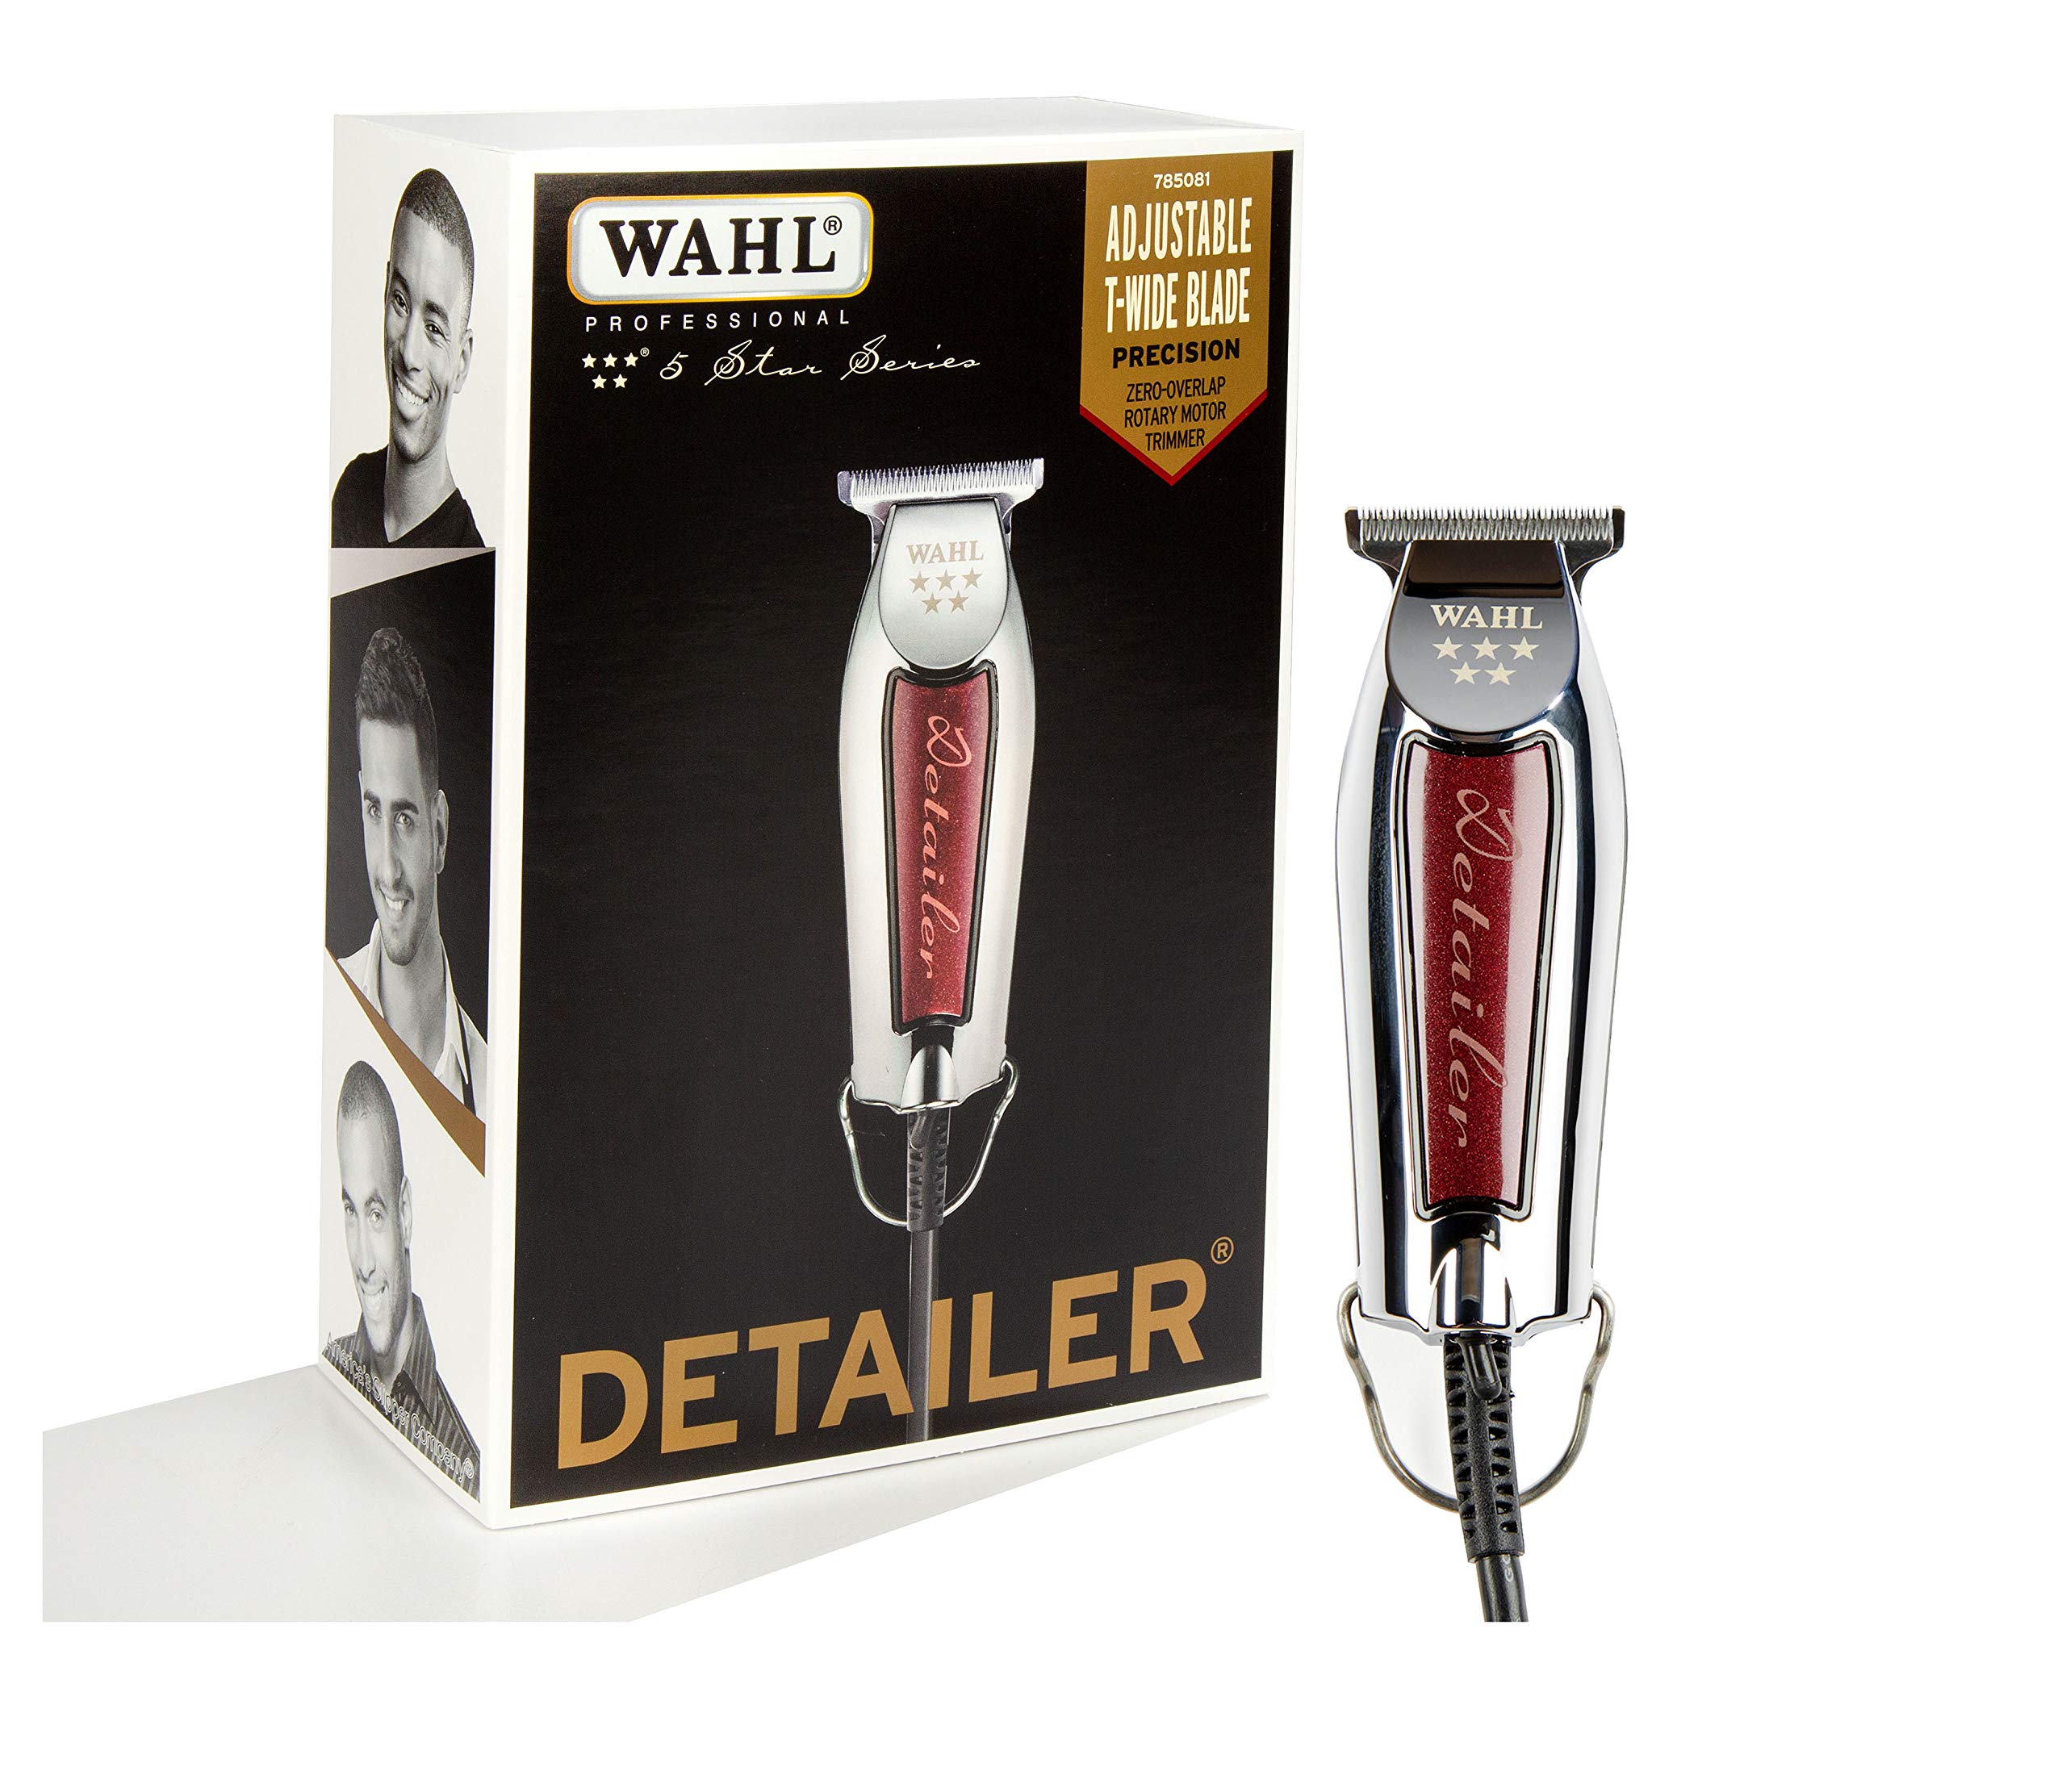 Wahl Professional 5-Star Detailer with Adjustable T Blade for Extremely  Close Trimming and Clean and